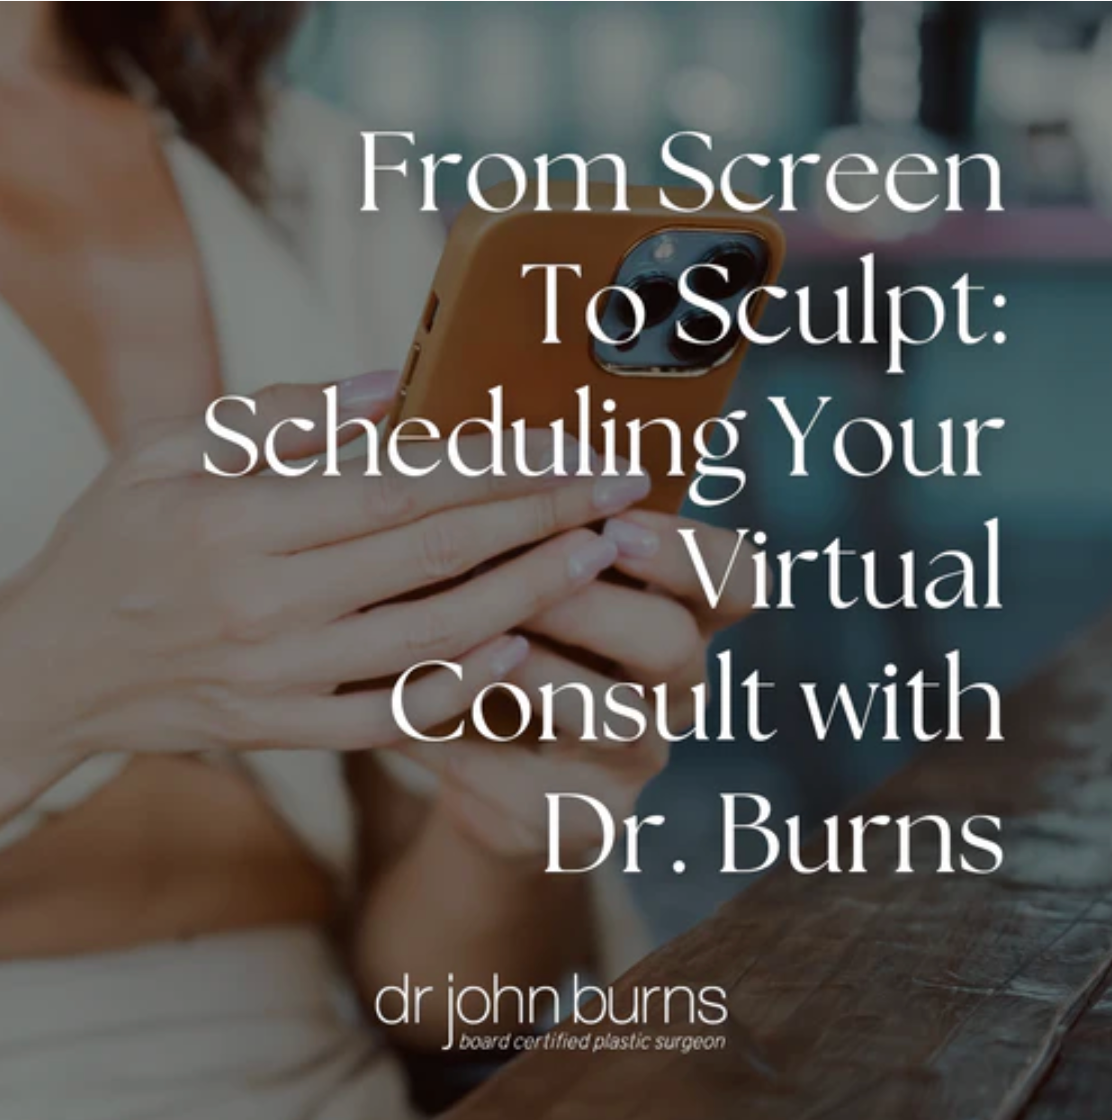 Fro Screen To Sculpt- Virtual Consult with Dr. Burns.png__PID:db220249-1c5a-4602-8555-89f054c88480